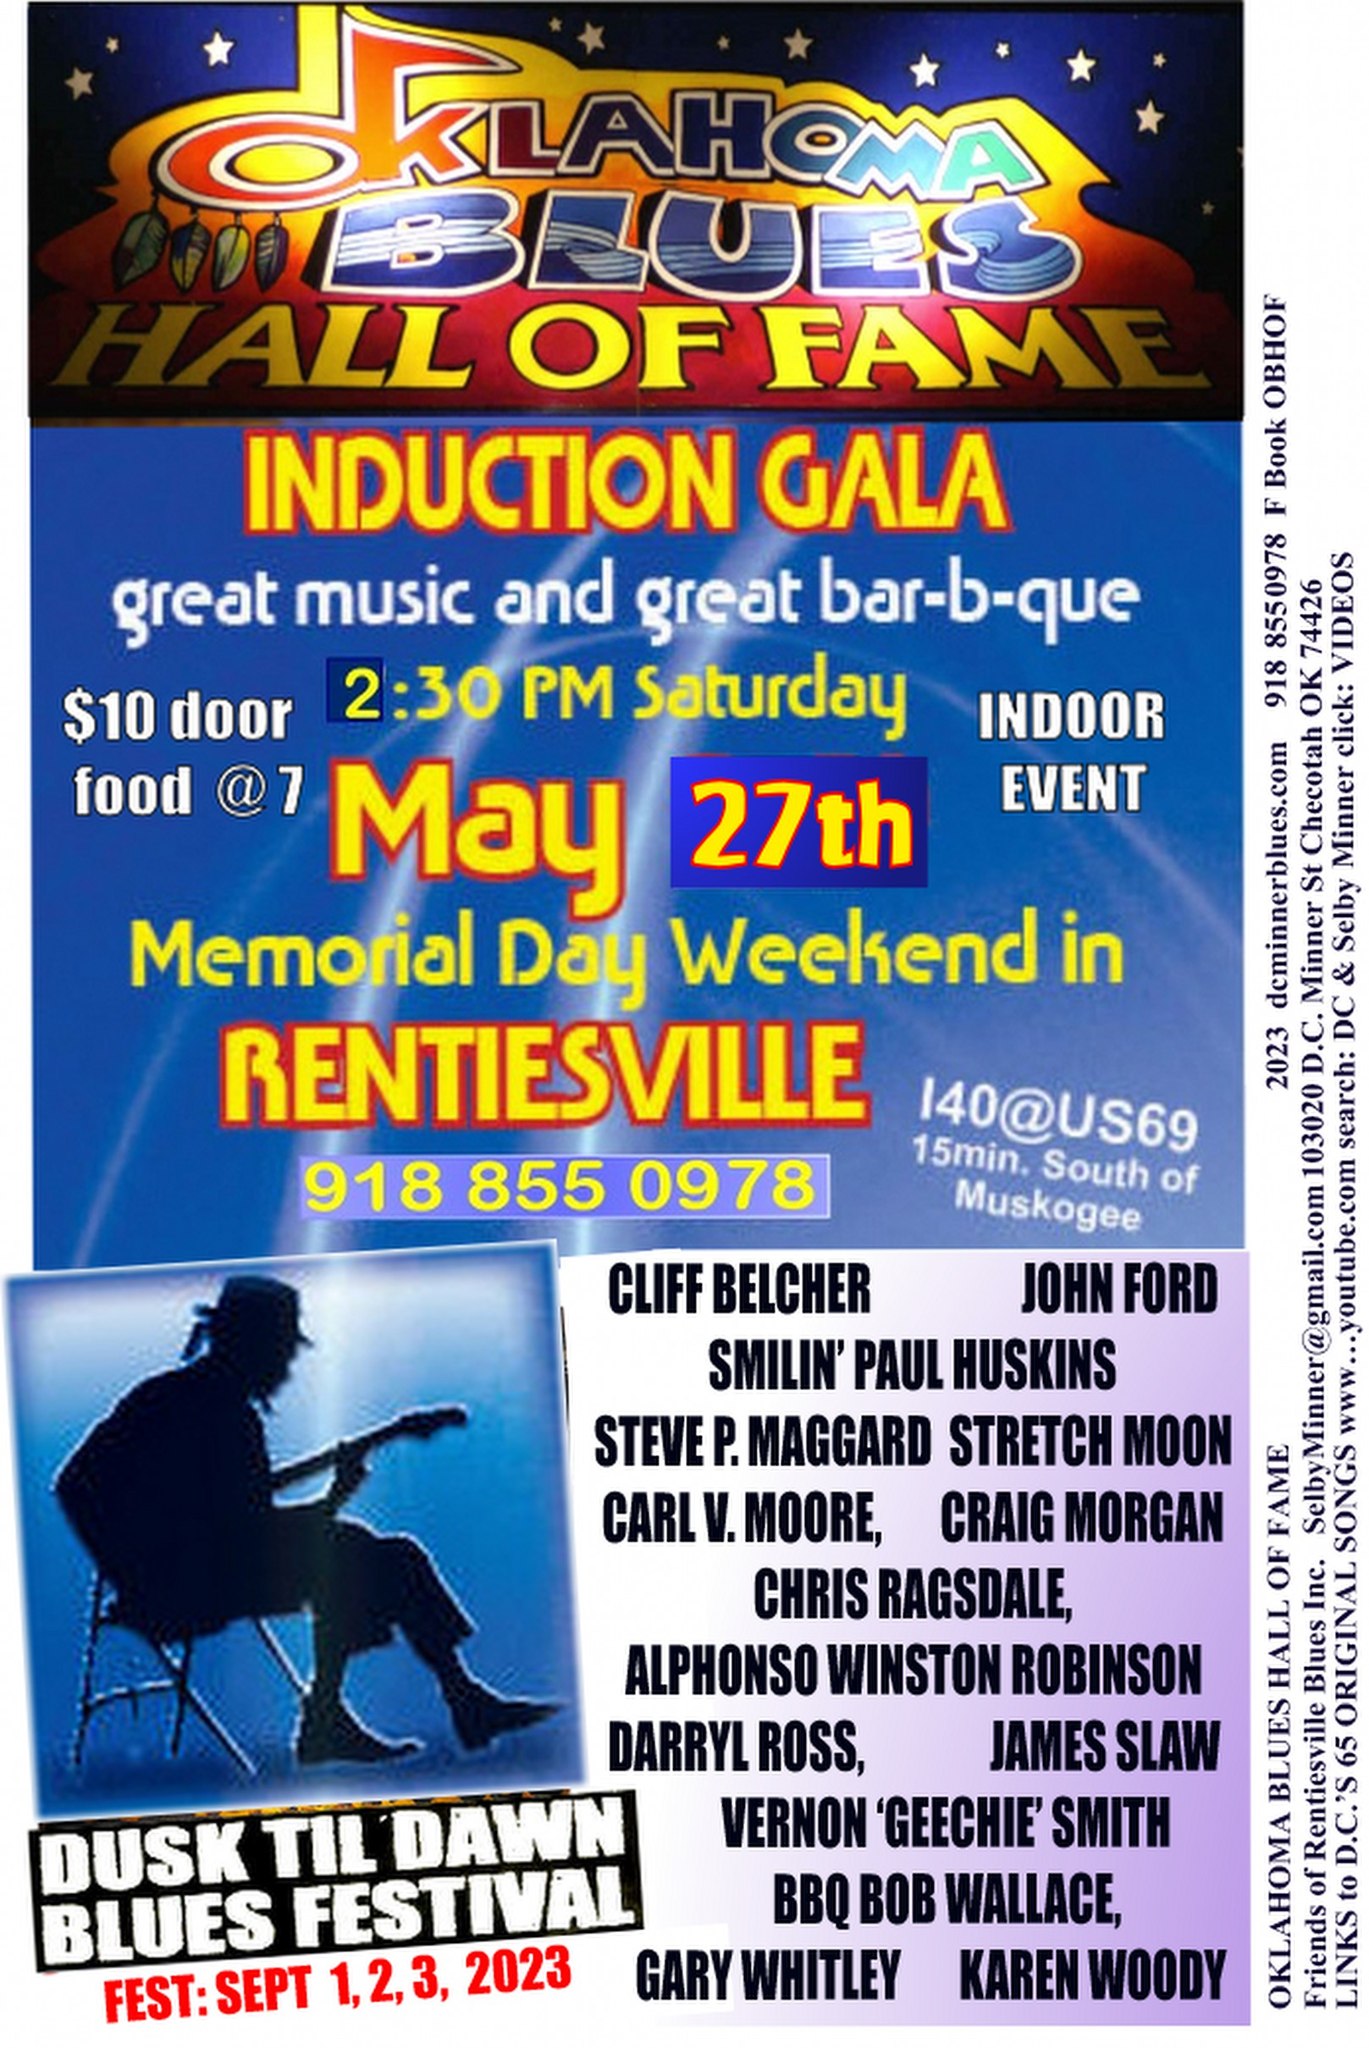 OK Blues Hall of Fame events and music Rentiesville Blues Fest, Selby